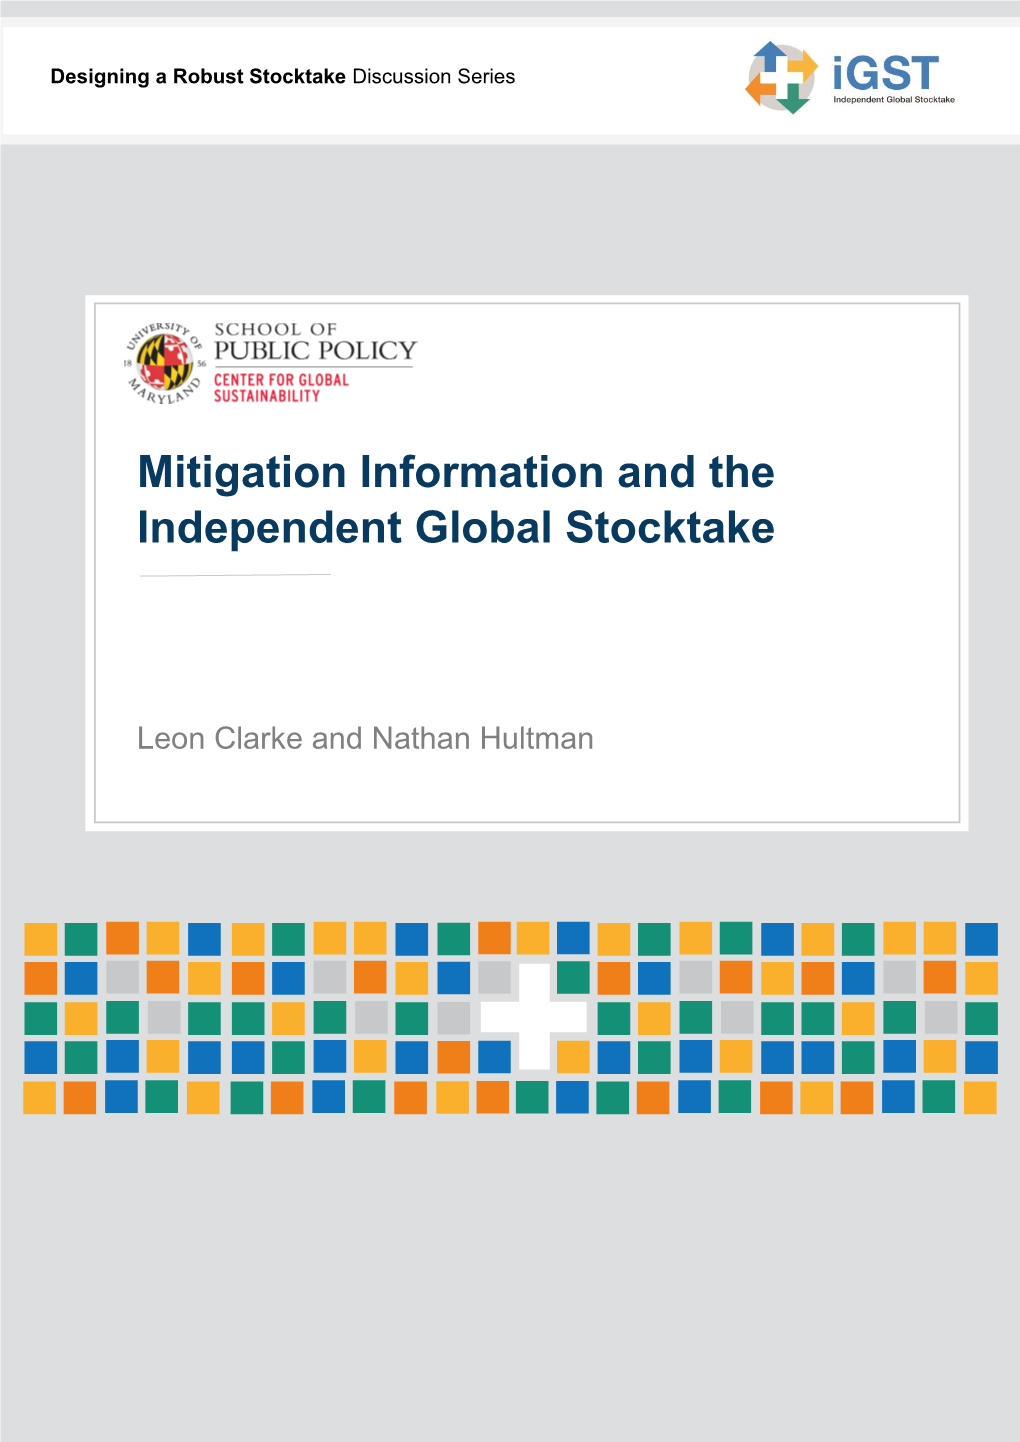 Mitigation Information and the Independent Global Stocktake